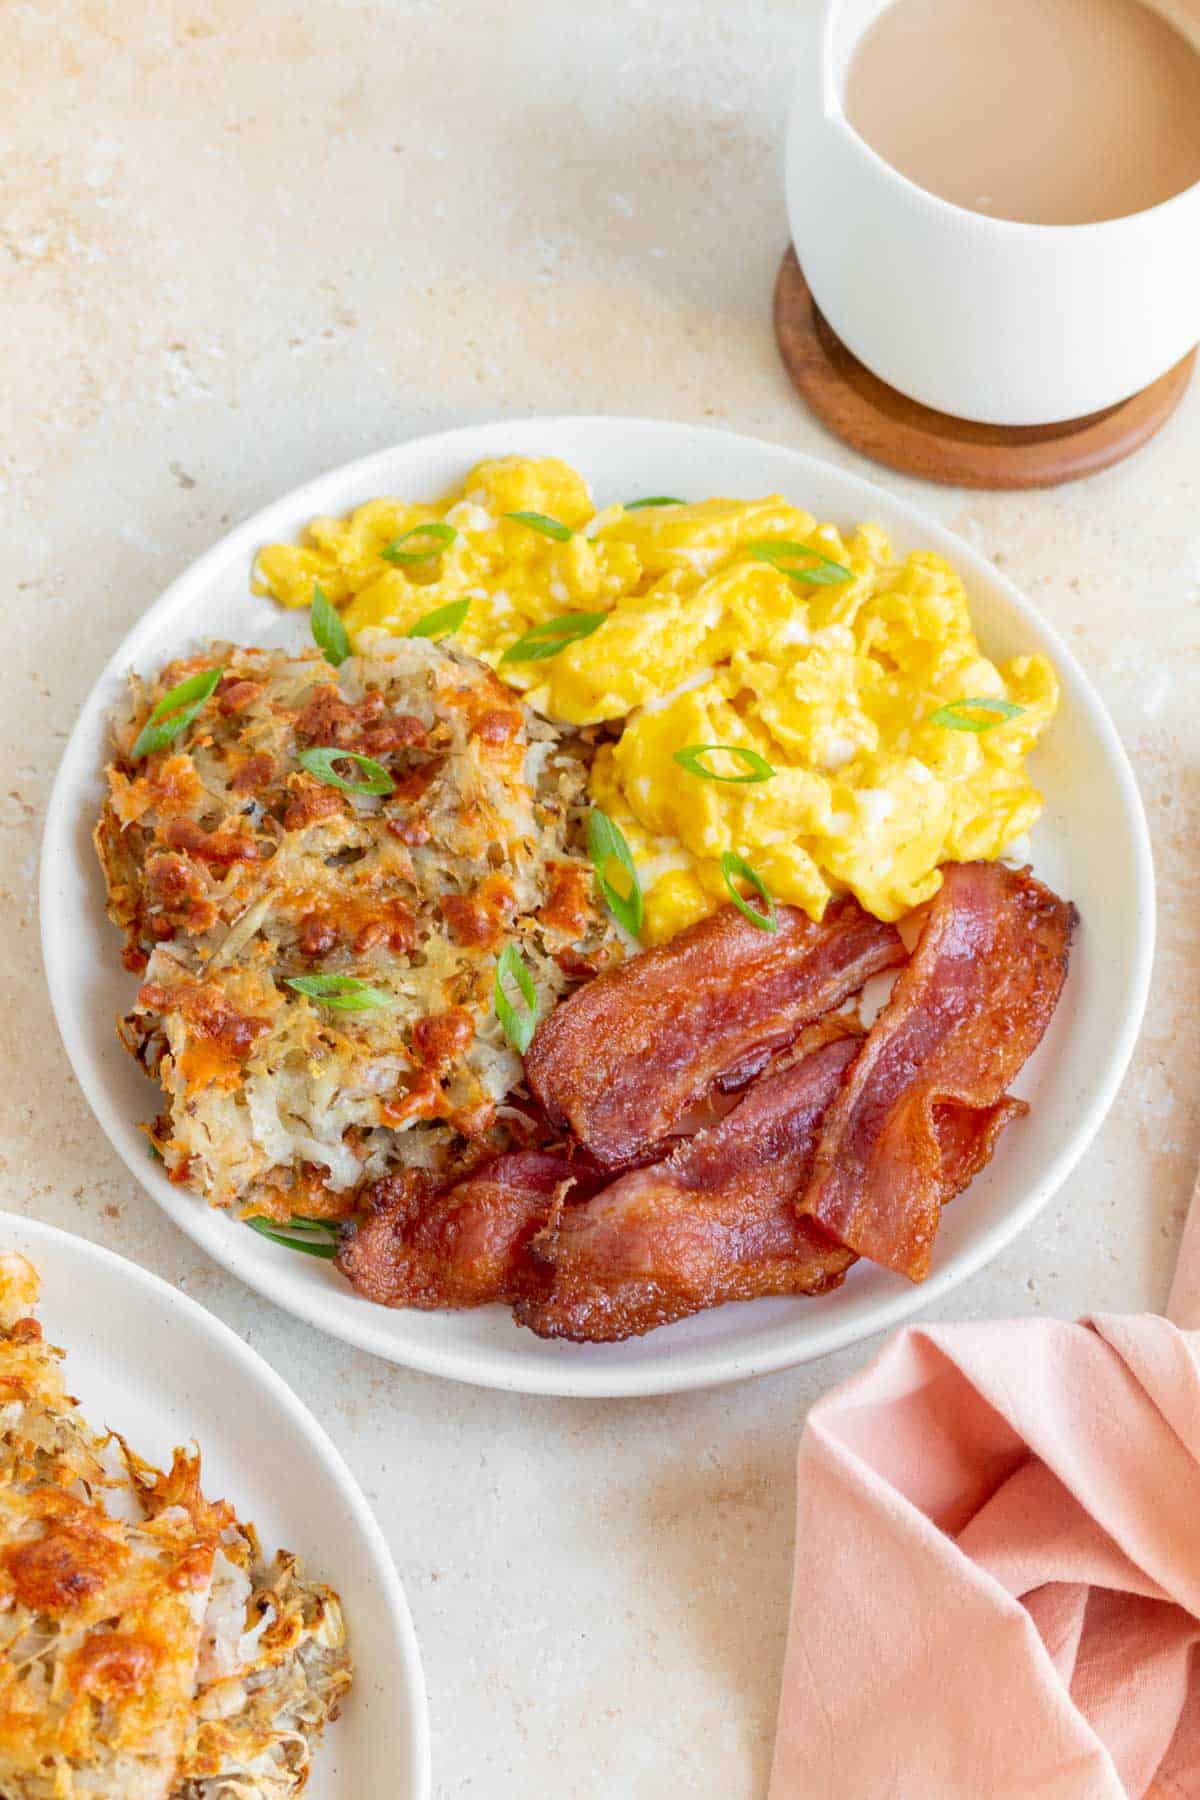 A plate with sheet pan hash browns, bacon, and scrambled eggs with a mug of coffee in the back.